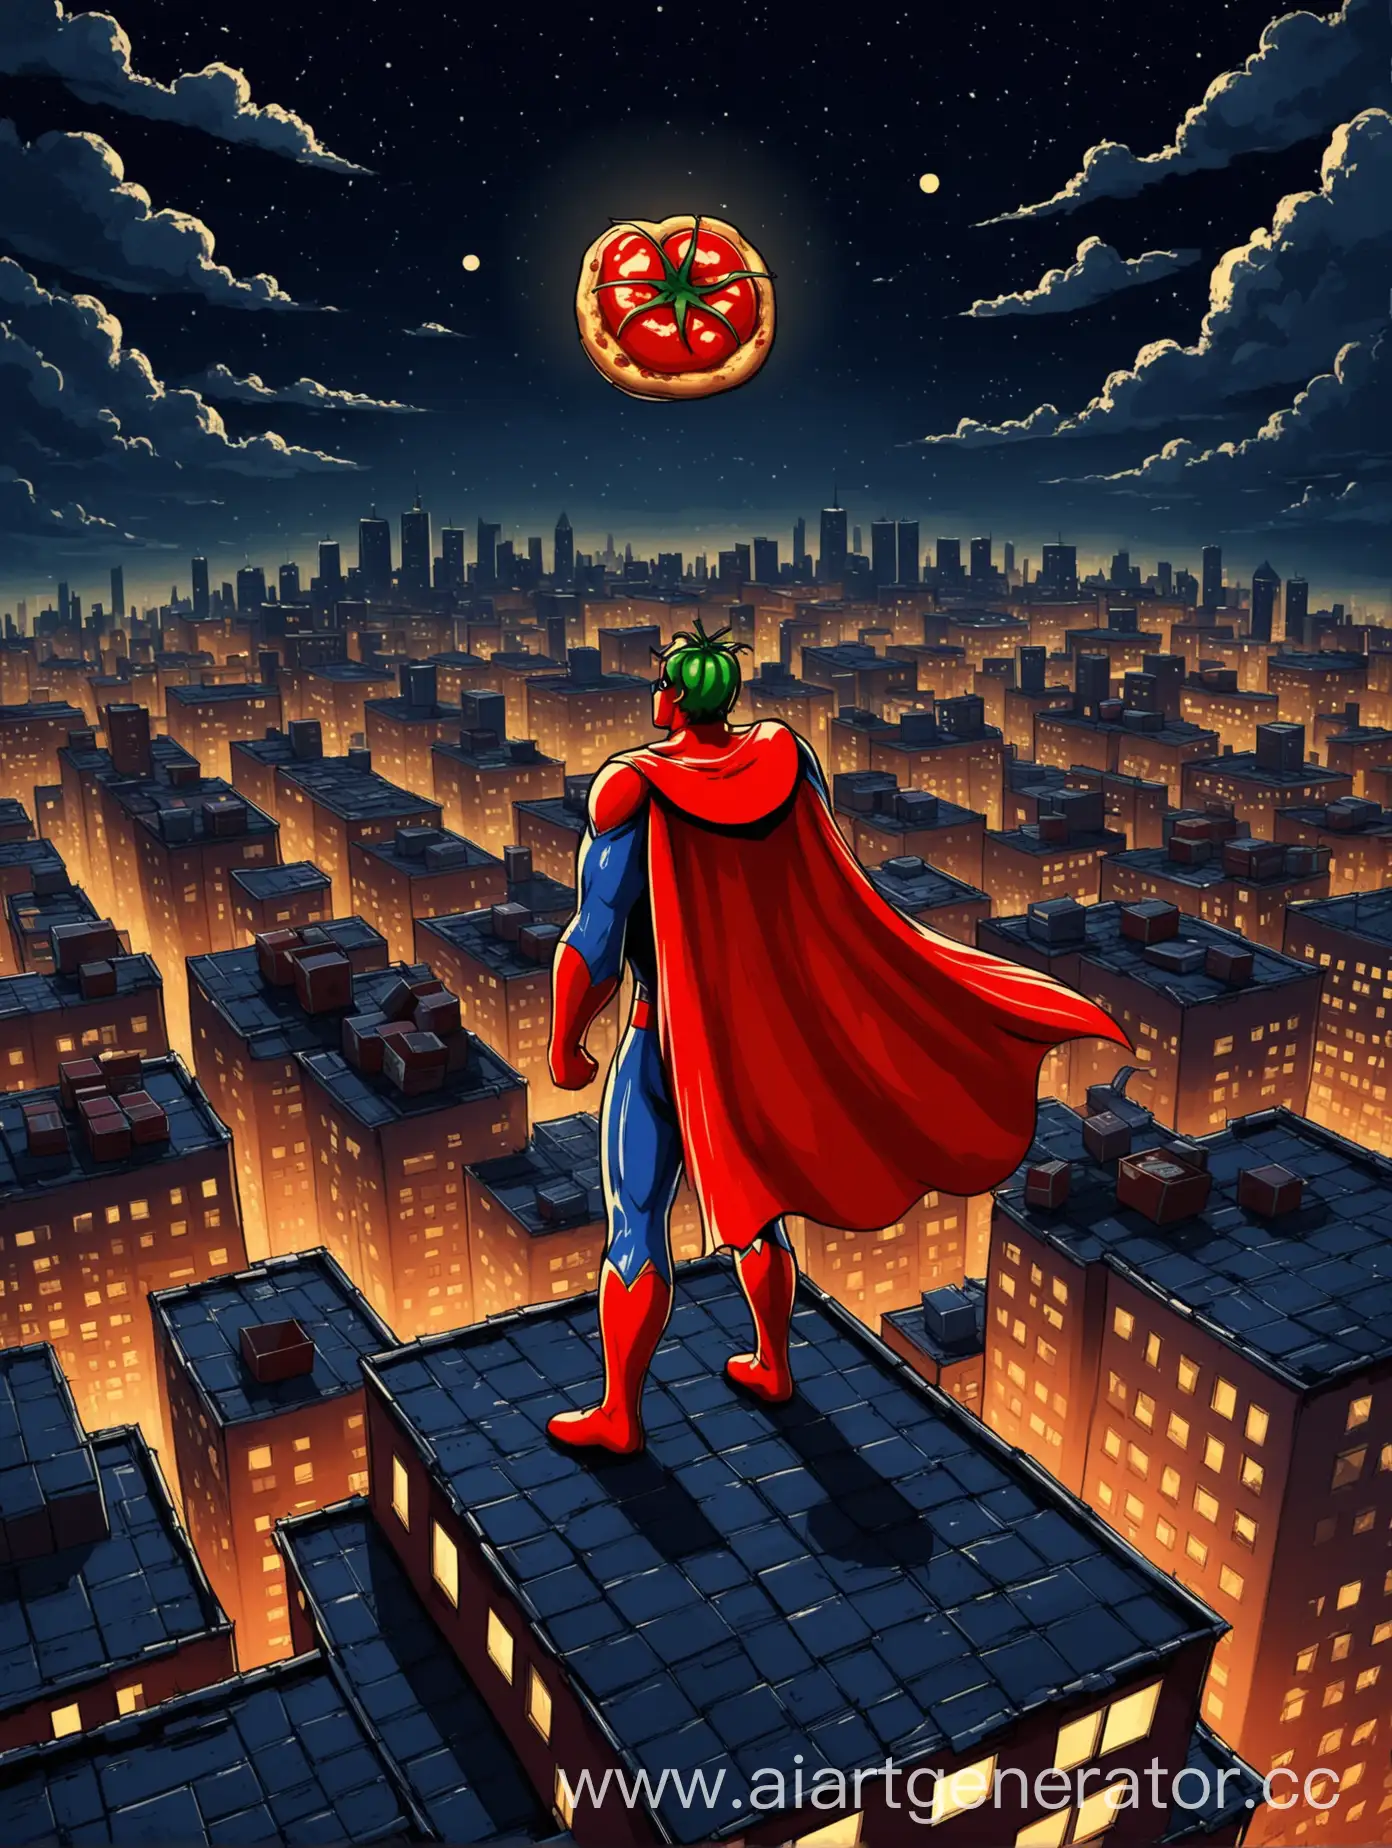 Tomato-Superhero-Standing-on-Night-City-Rooftop-with-Pizza-Boxes